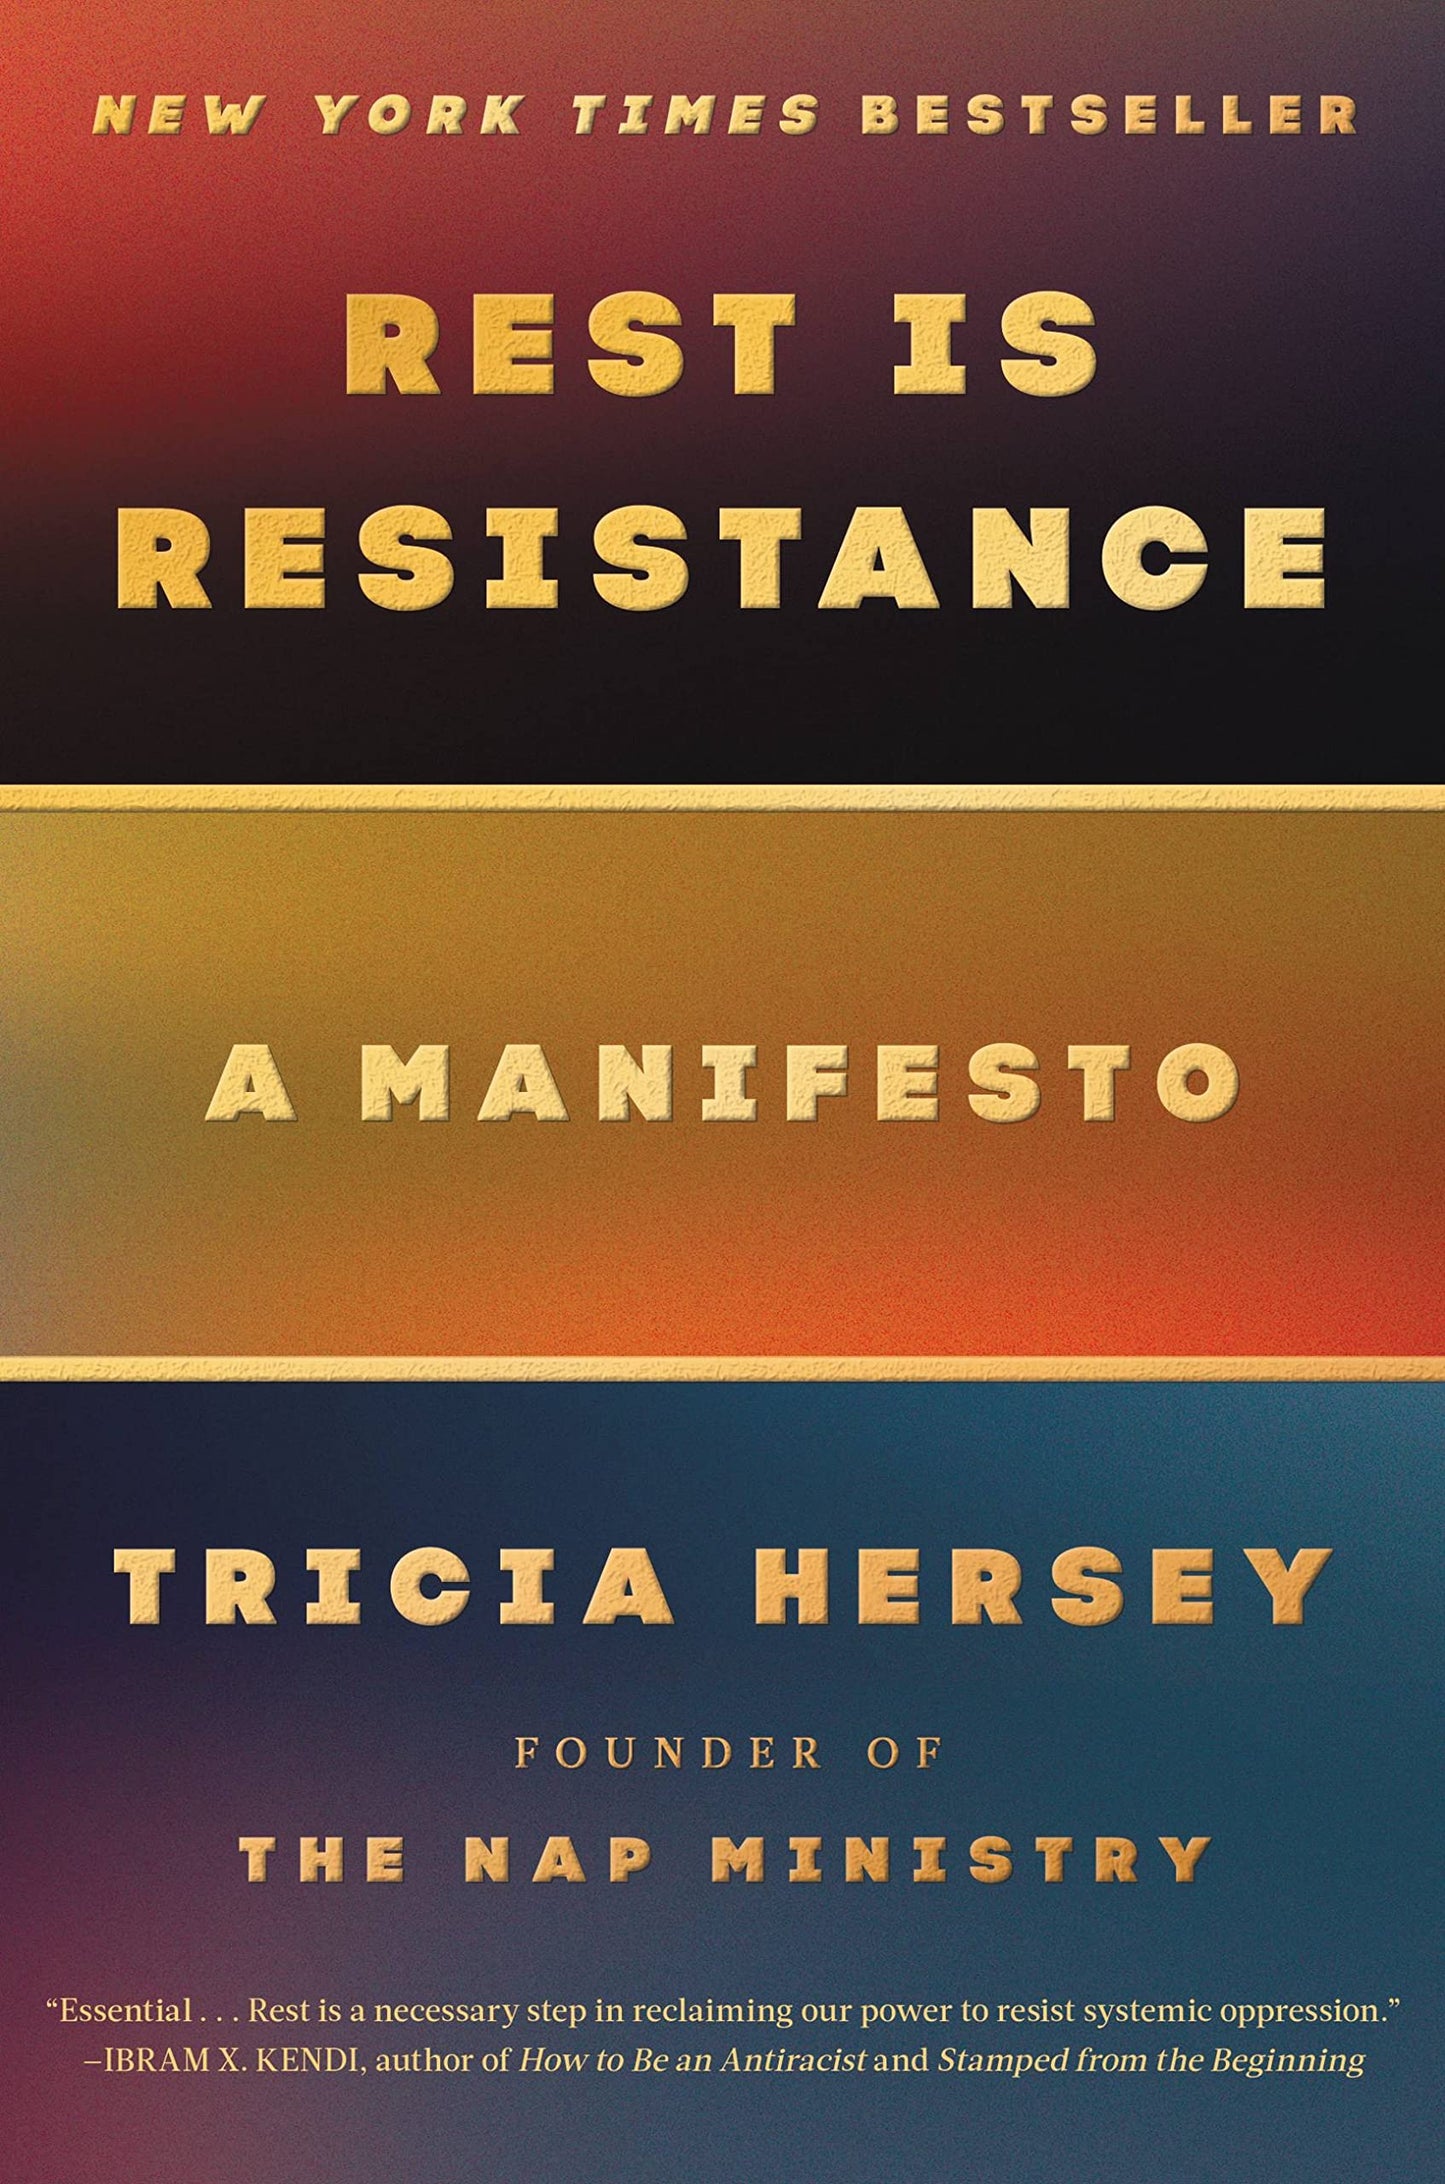 Rest is Resistance, by Tricia Hersey